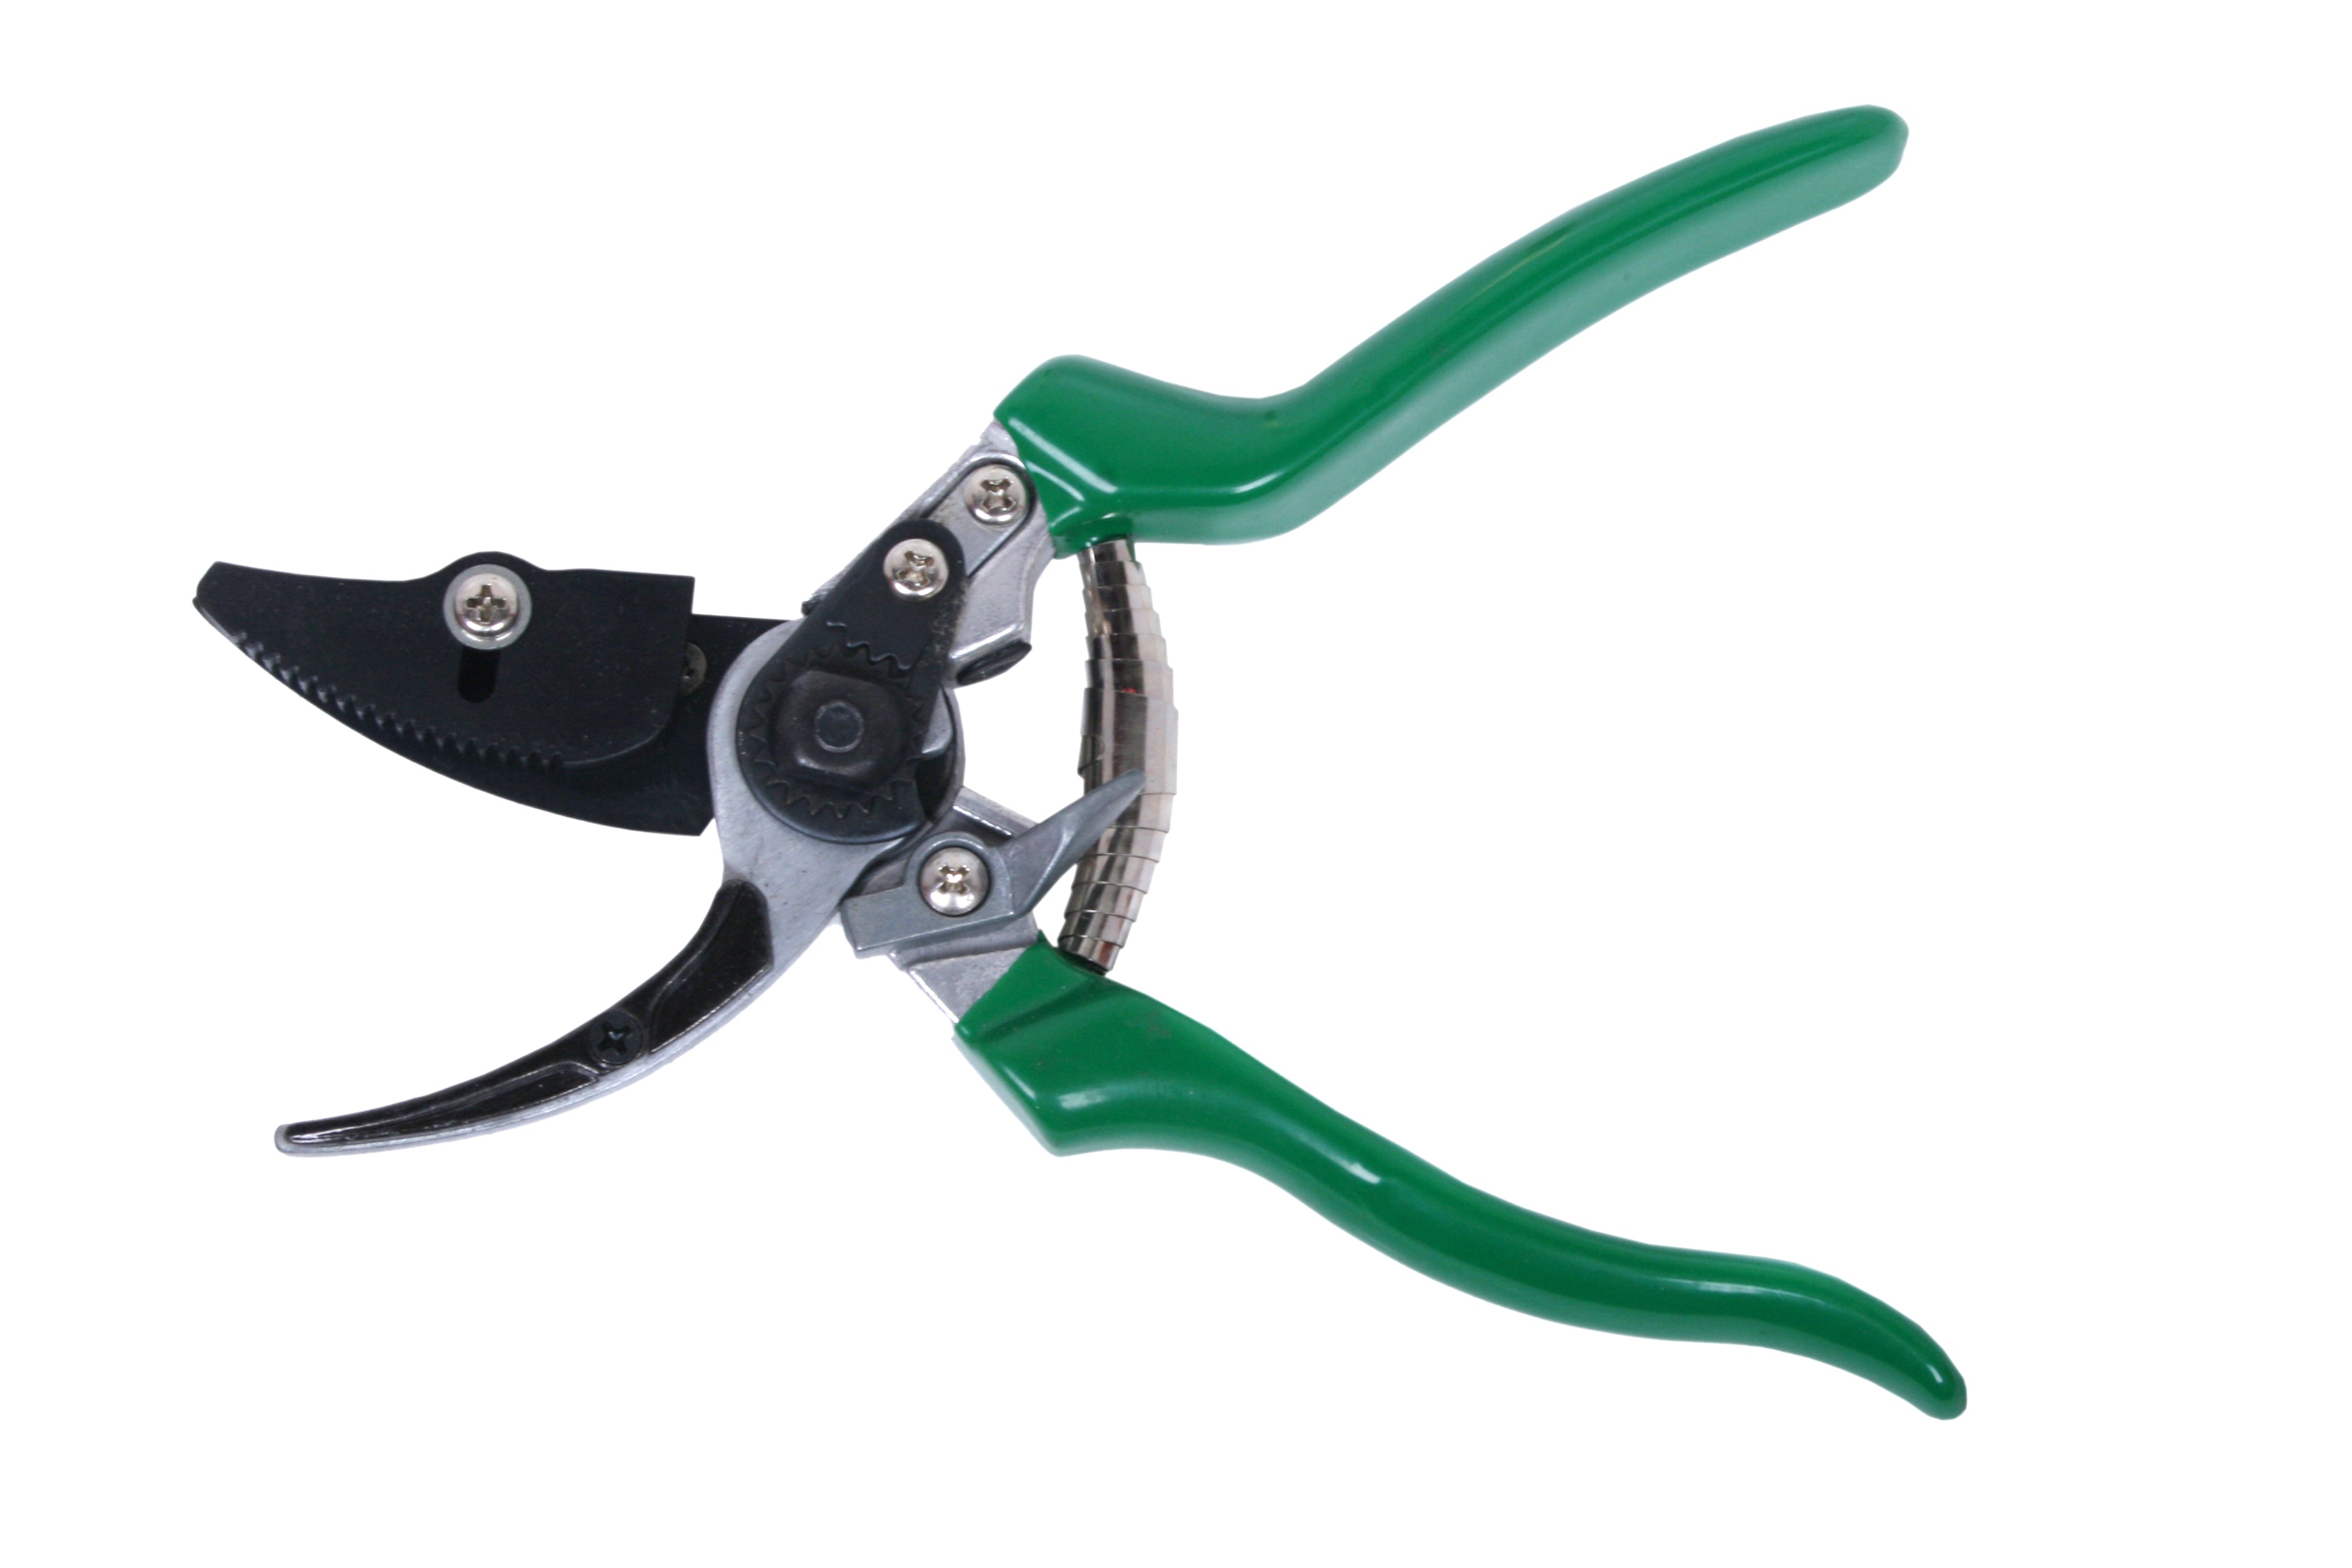 Cut And Hold Pruner Planter Silver And Green: Garden Tools - myBageecha